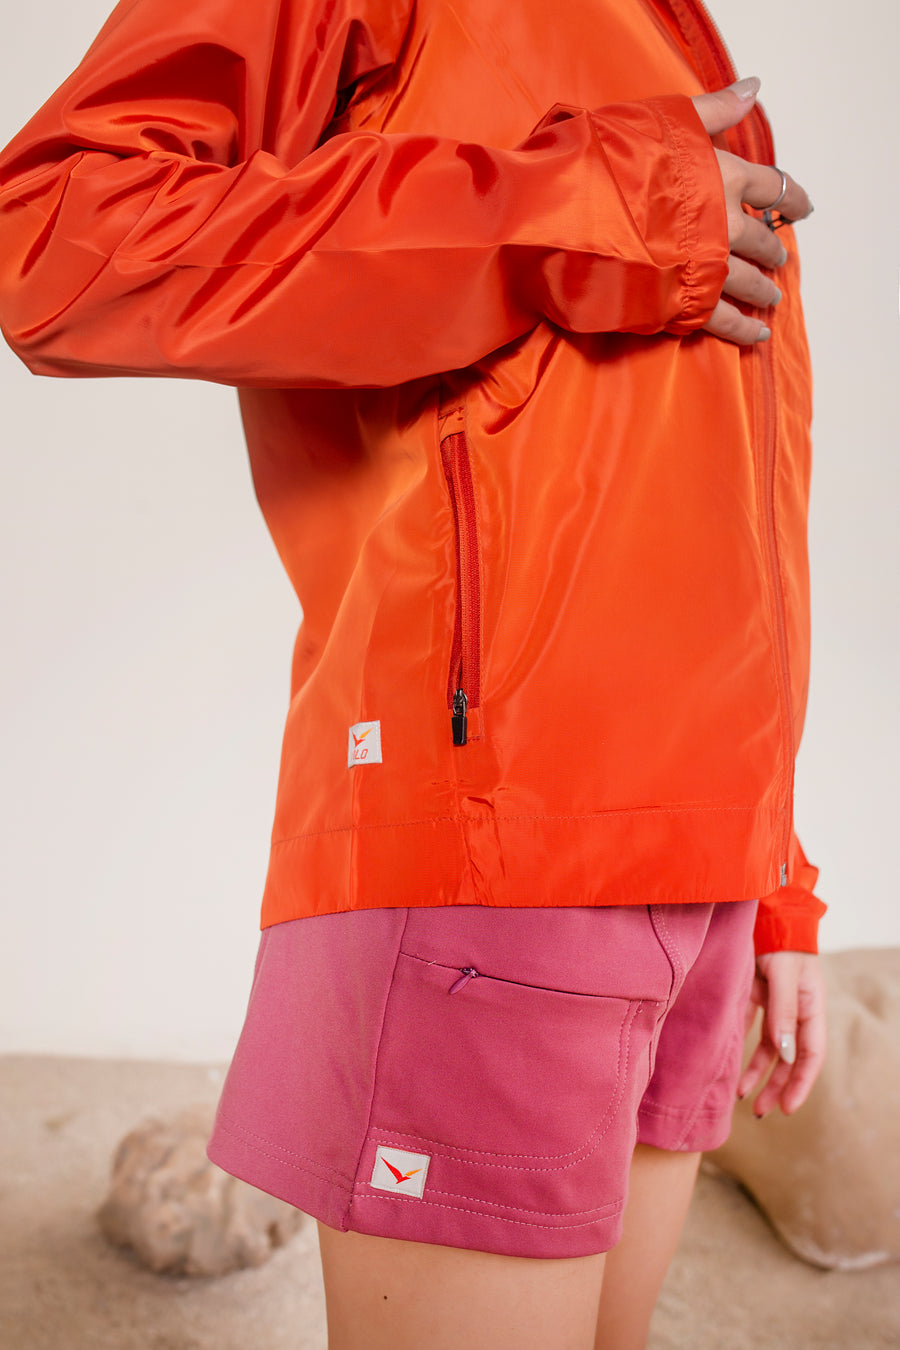 Women's Windansea Jacket in Orange | VOLO Apparel | The ultimate all year jacket, an ultralight hooded windbreaker, crafted with the revolutionary memory fabric and five pockets. This jacket is full of features, water repellant, three zipper pockets, UPF 50 protection from the sun and tailored fit to look super stylish while being ready for any adventure.